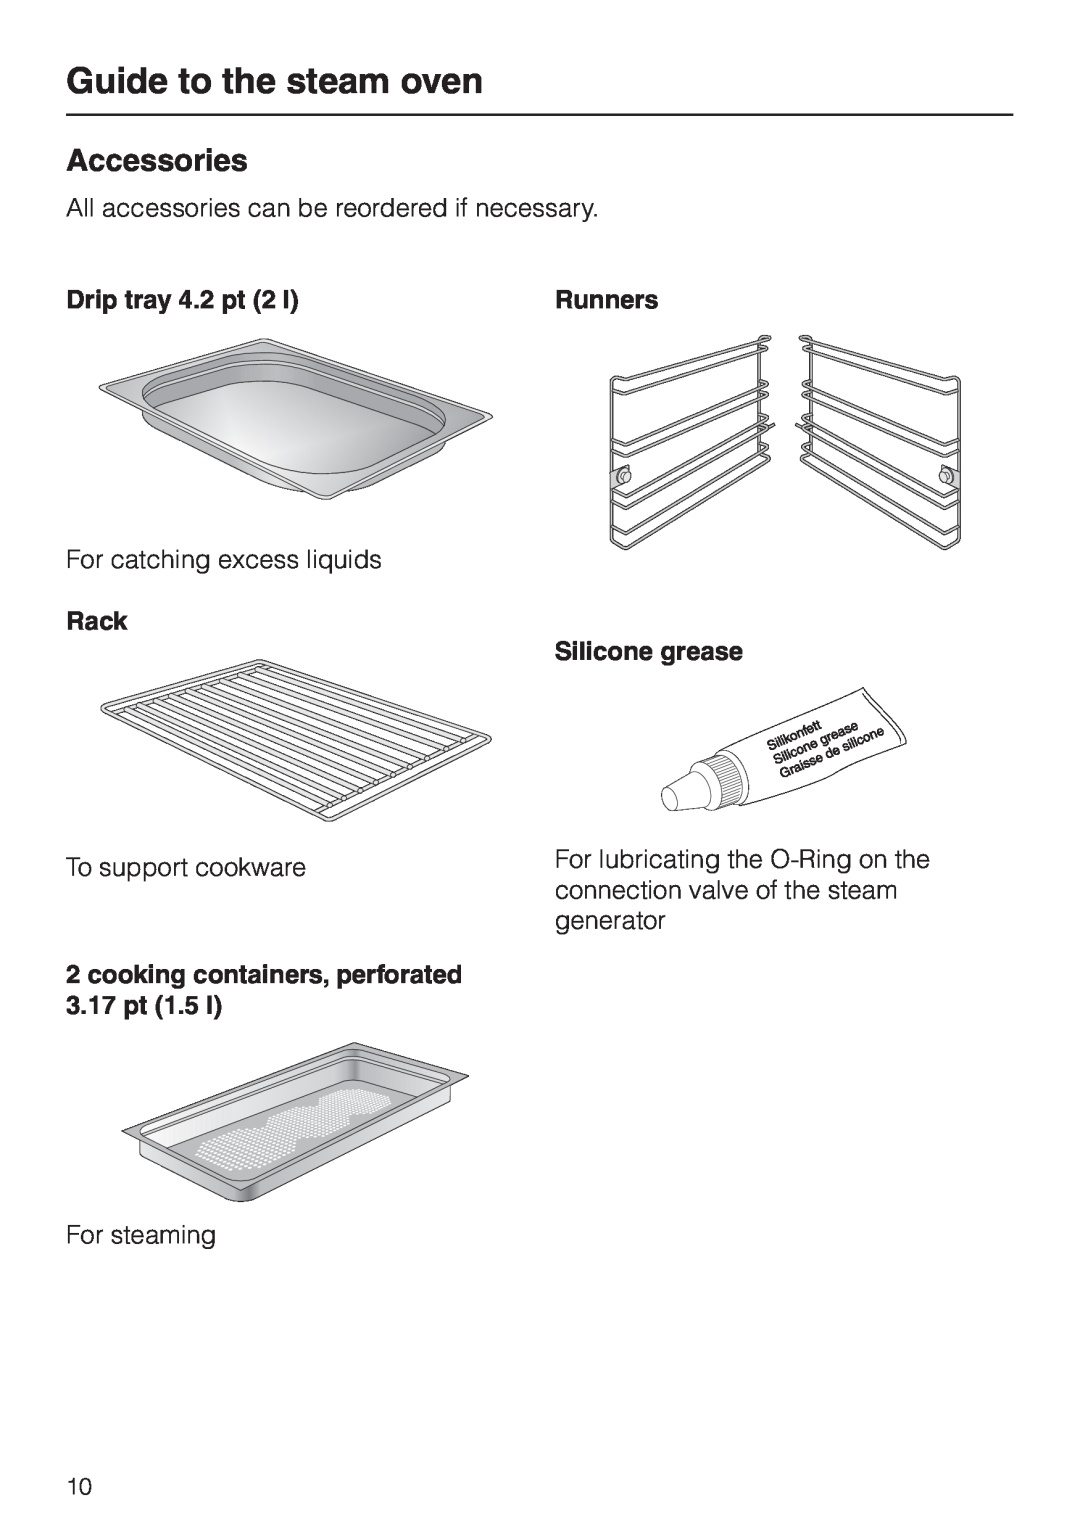 Miele DG 2661 Accessories, Guide to the steam oven, Drip tray 4.2 pt 2 l, Runners, Rack, Silicone grease 